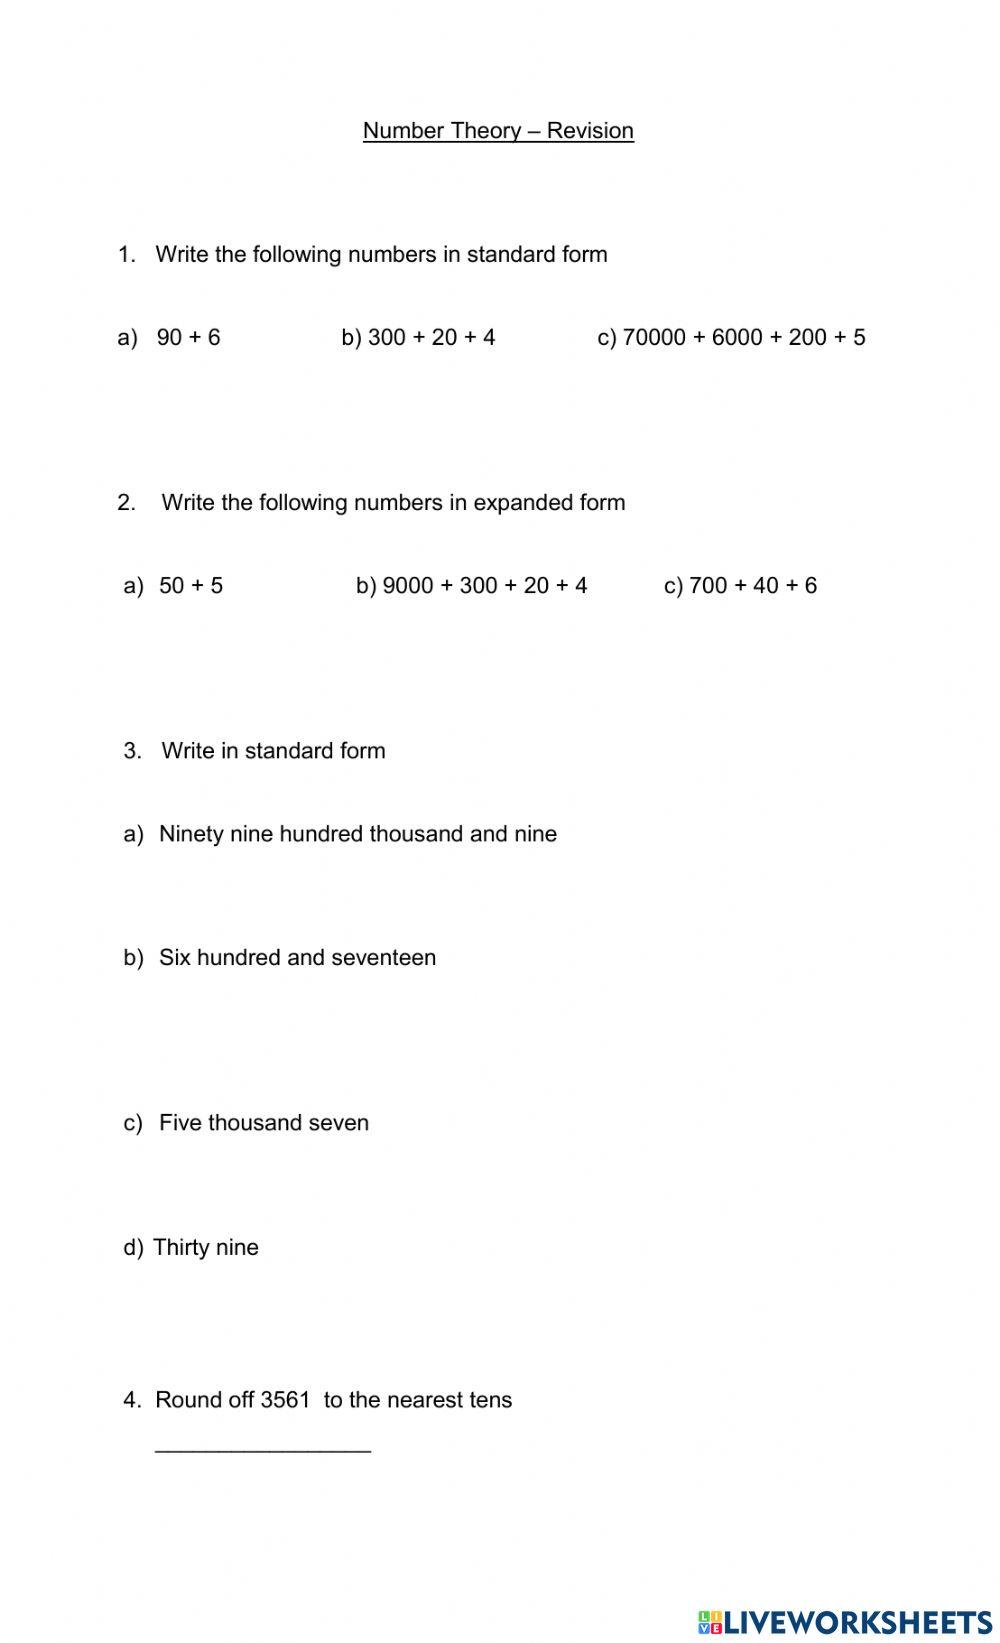 Number theory Revision